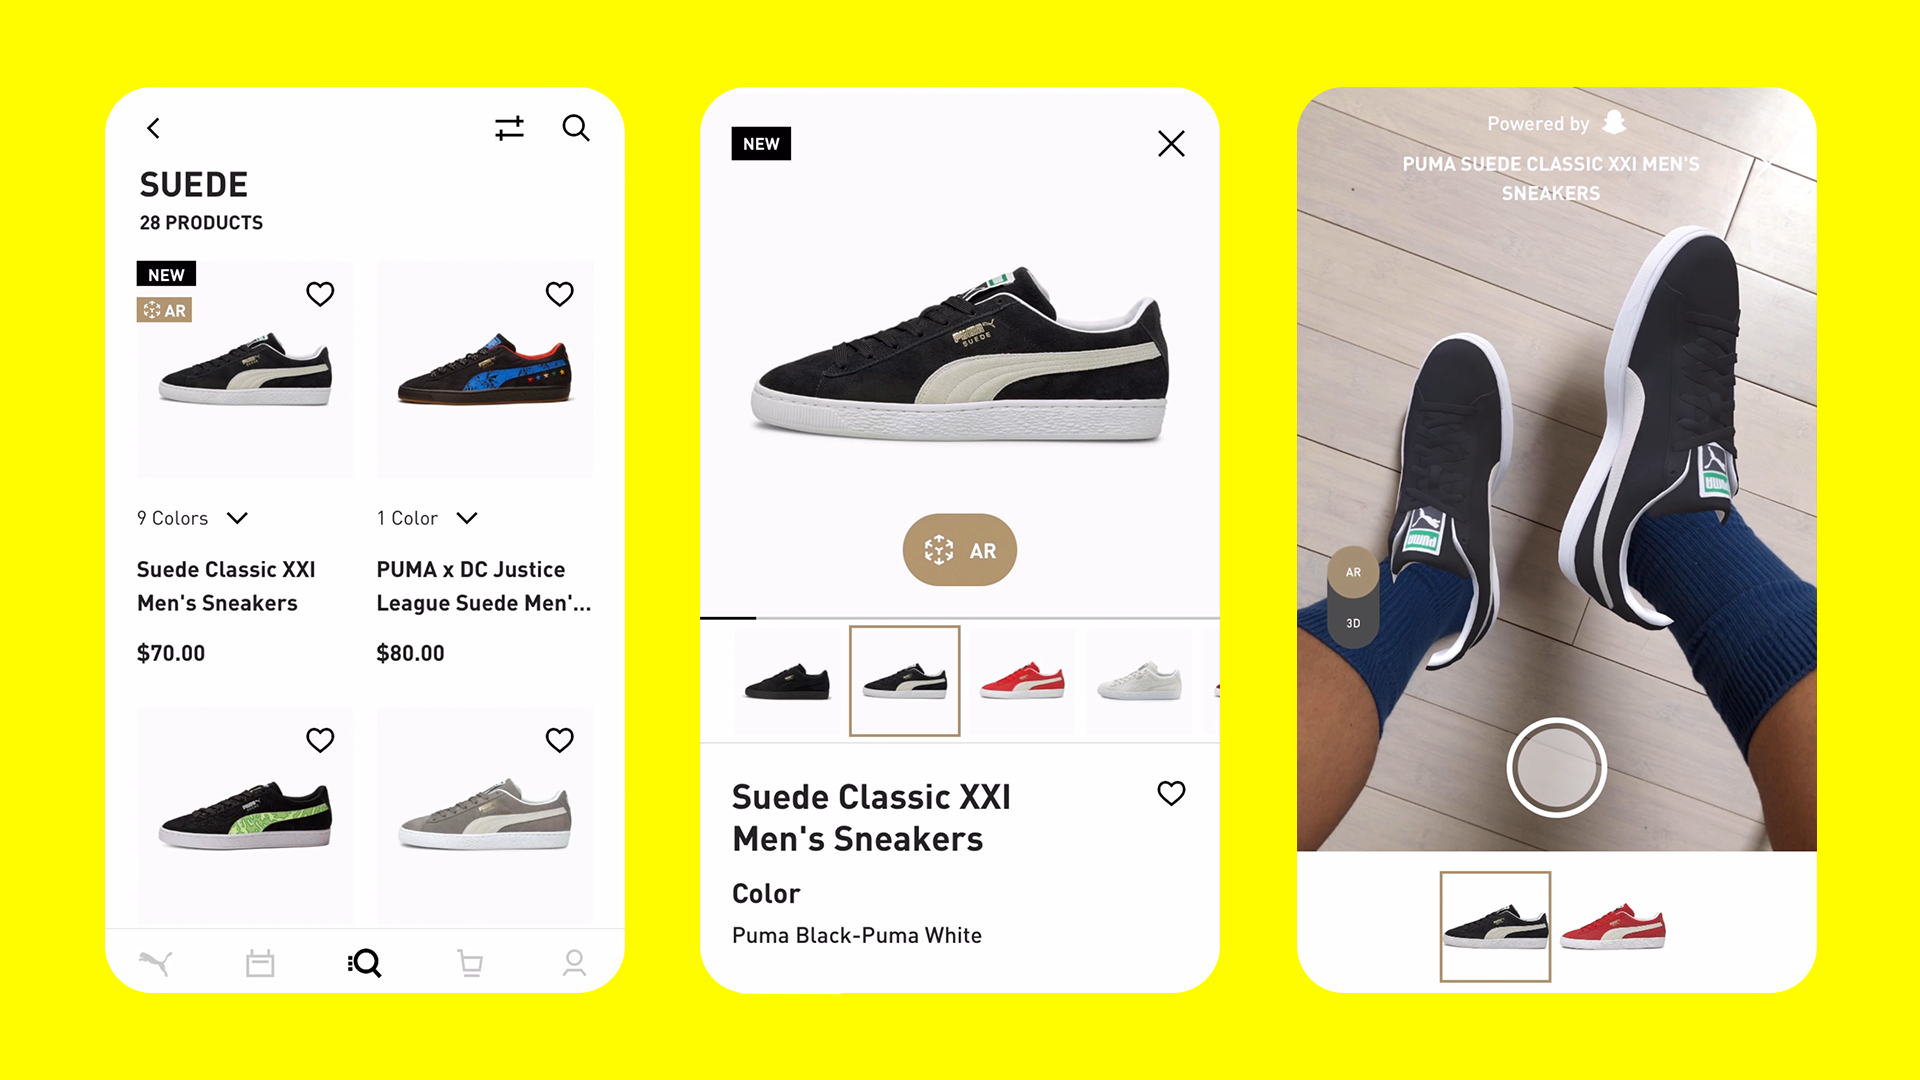 Snap's new AR tools turn photos into 3D assets, let retailers use Snap's AR  tech in their own apps | TechCrunch